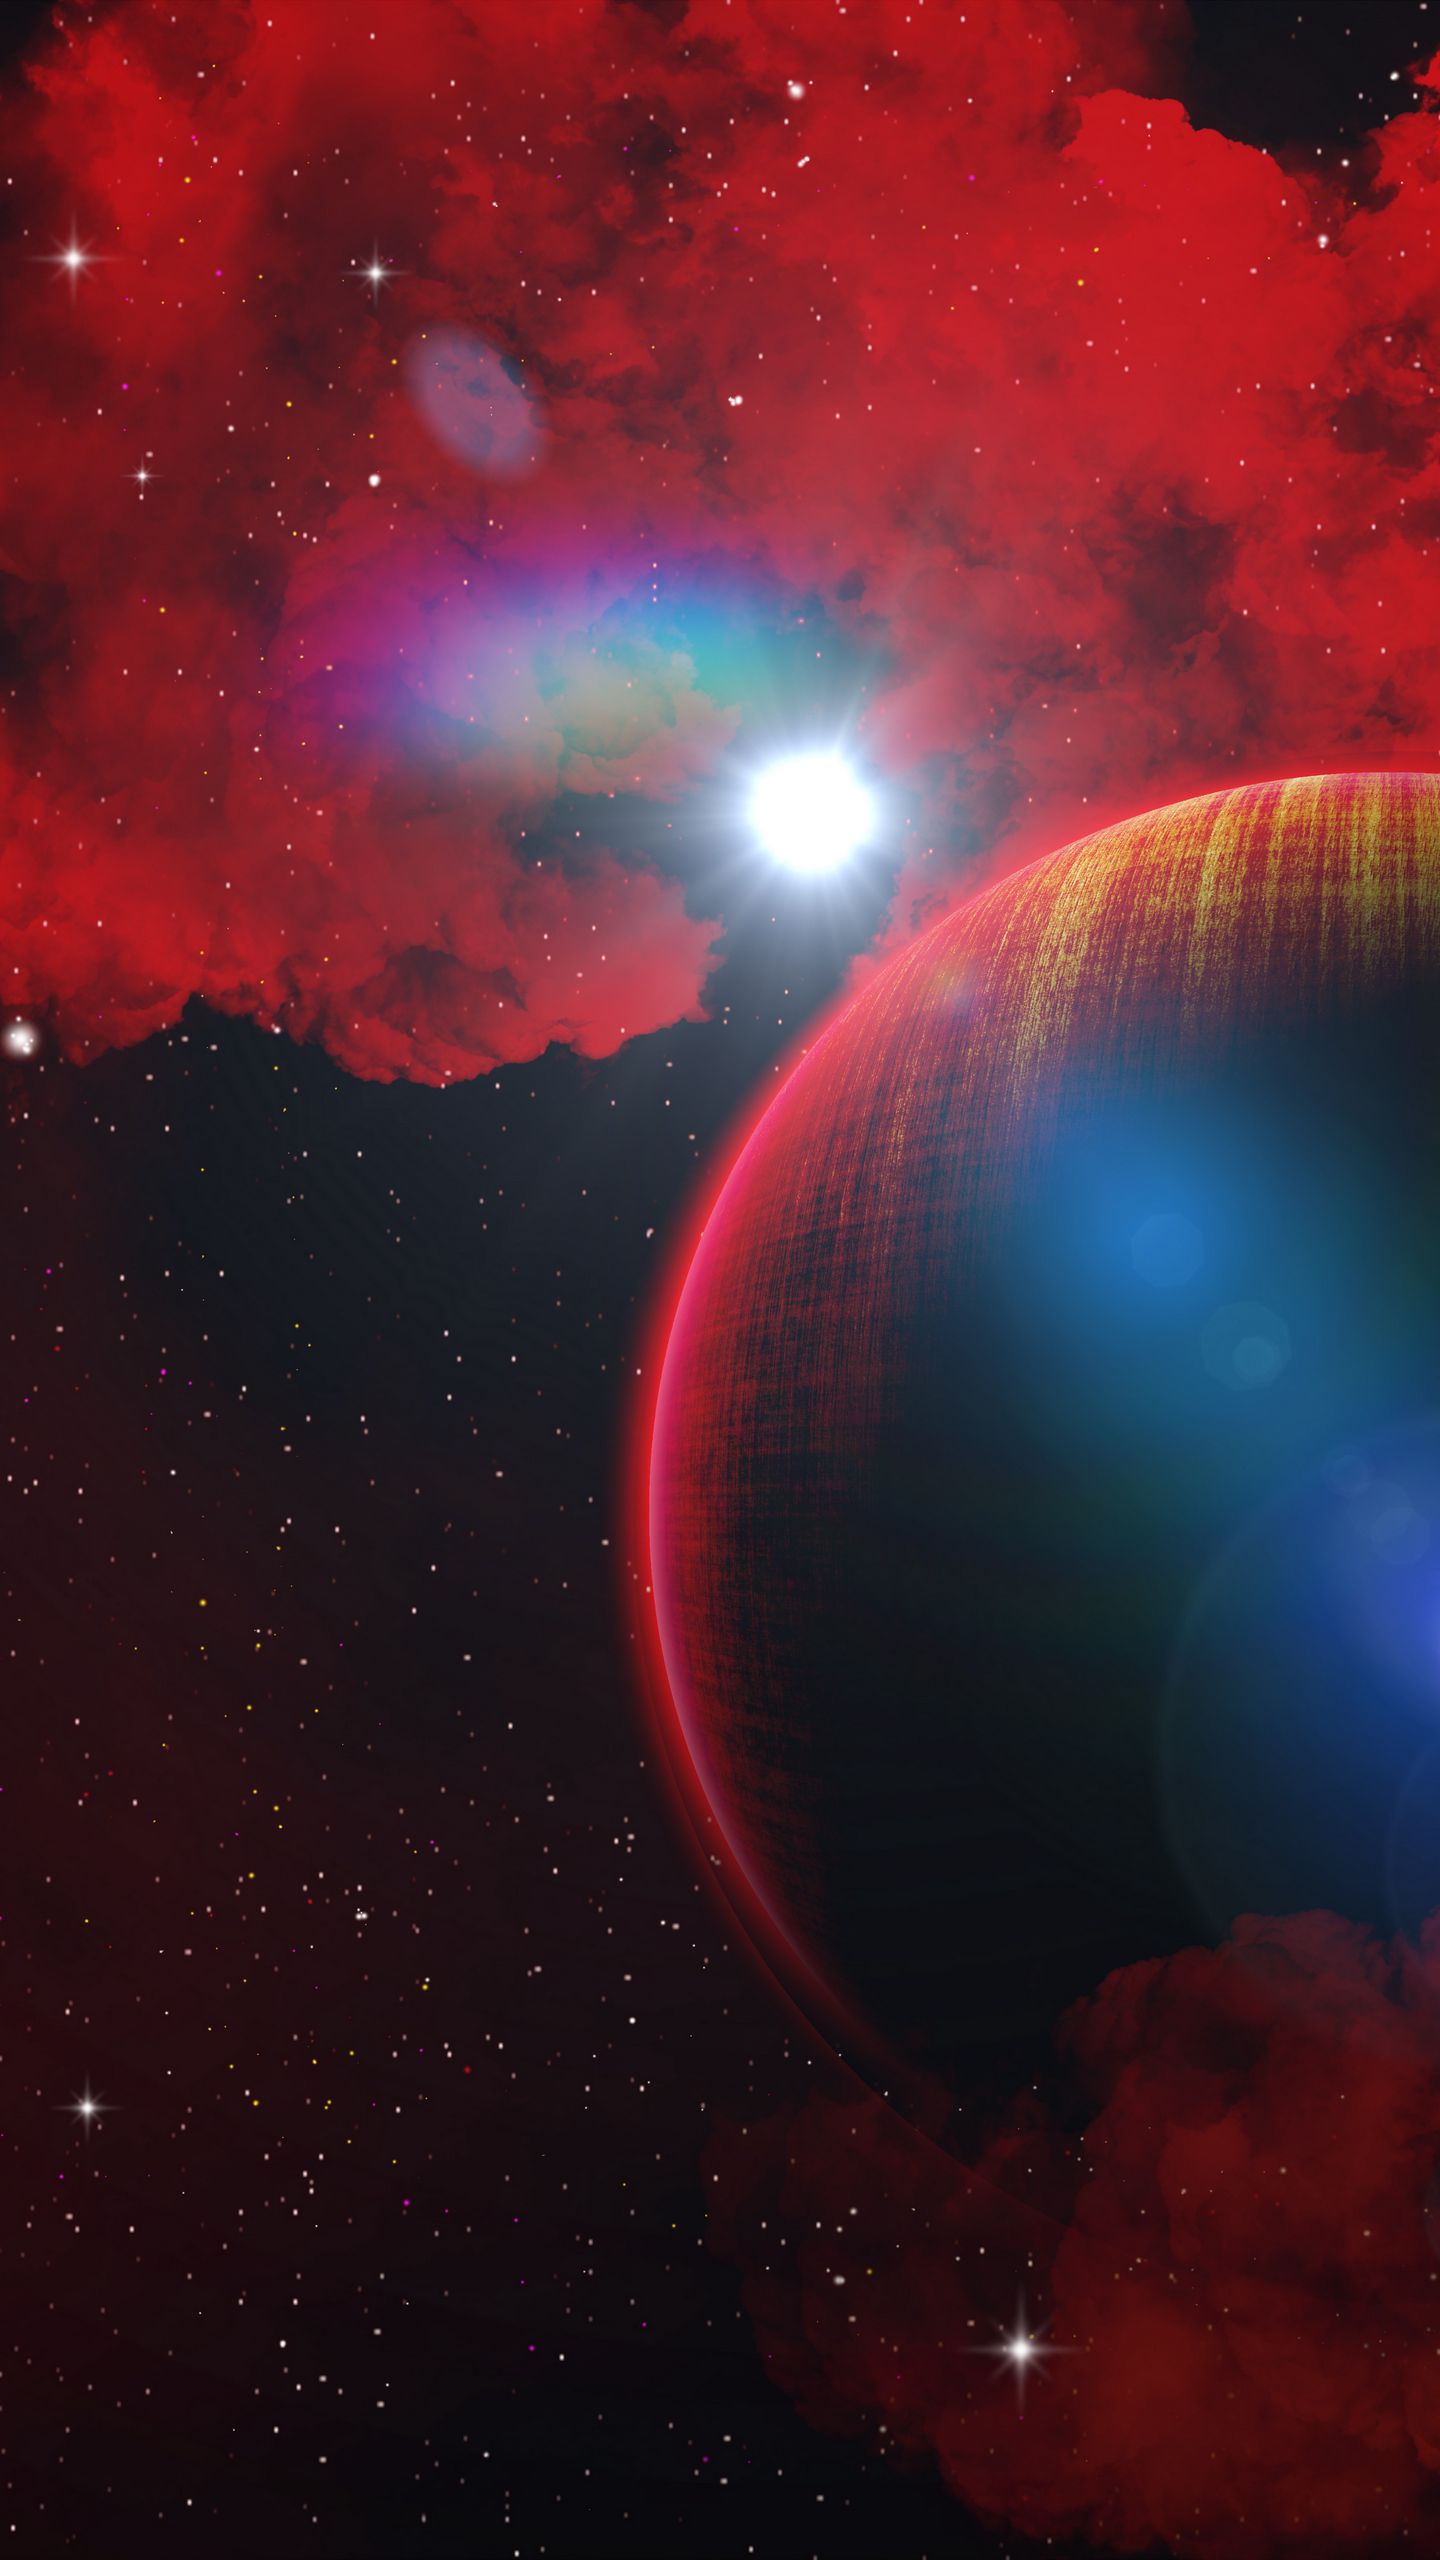 Download wallpaper 1440x2560 planet, red, fantasy, star, space qhd samsung galaxy s s edge, note, lg g4 HD background